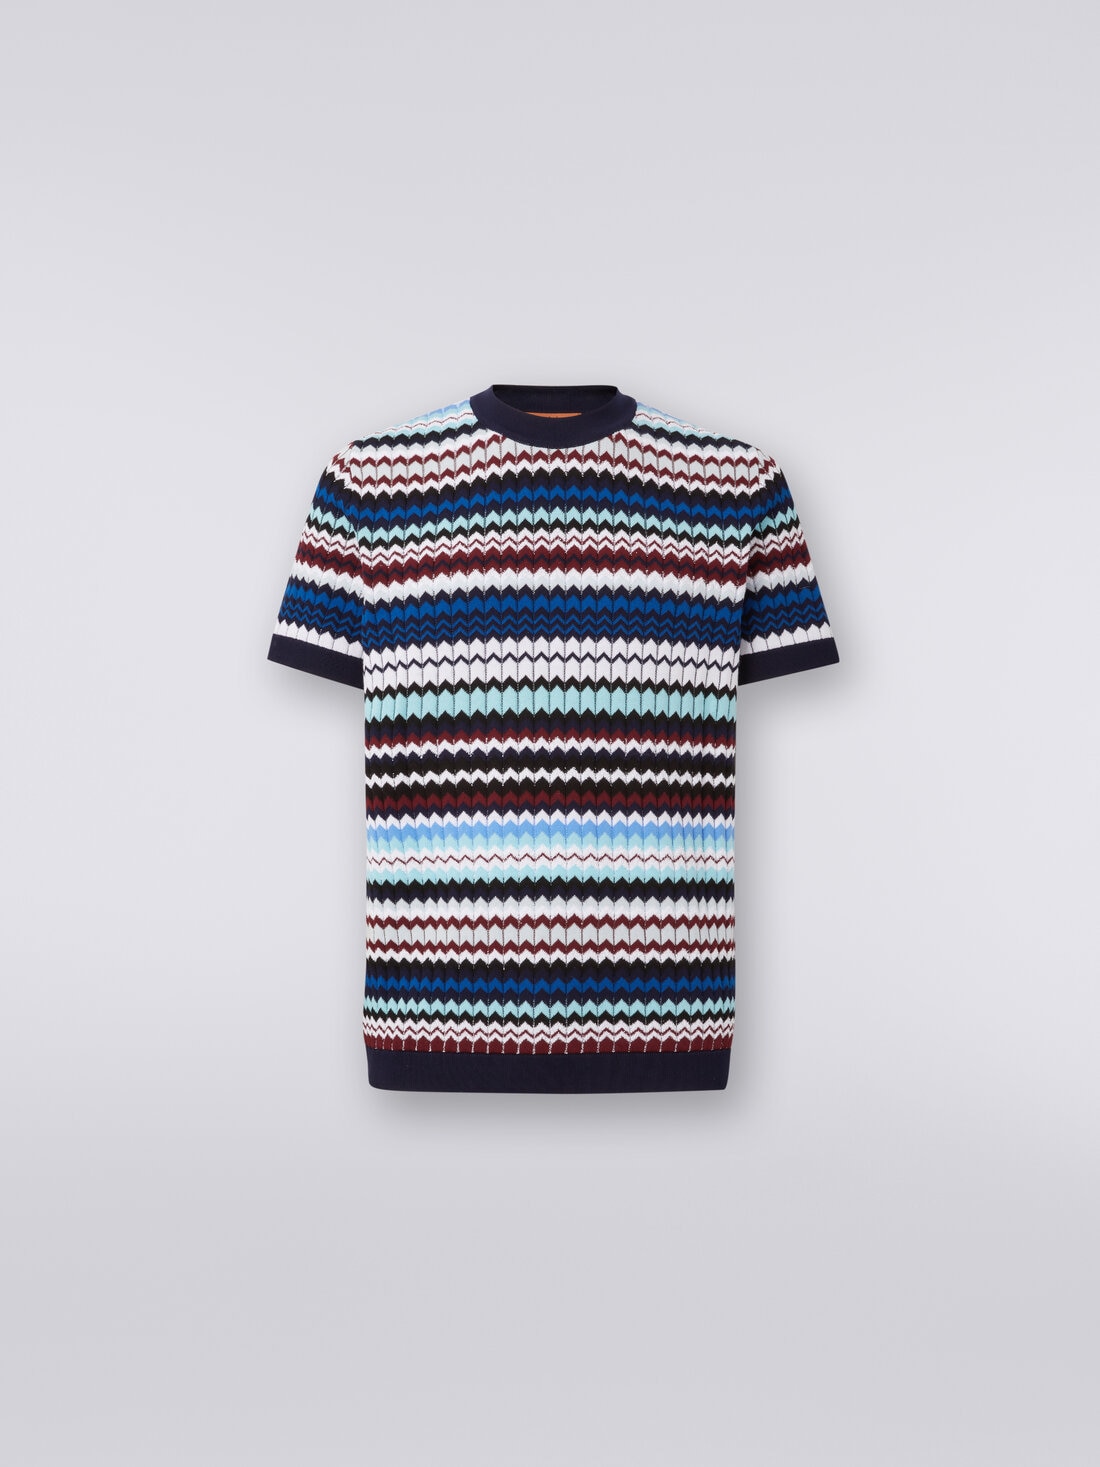 T-shirt in ribbed zigzag cotton knit, Multicoloured  - US24SL0DBK034NS72EY - 0